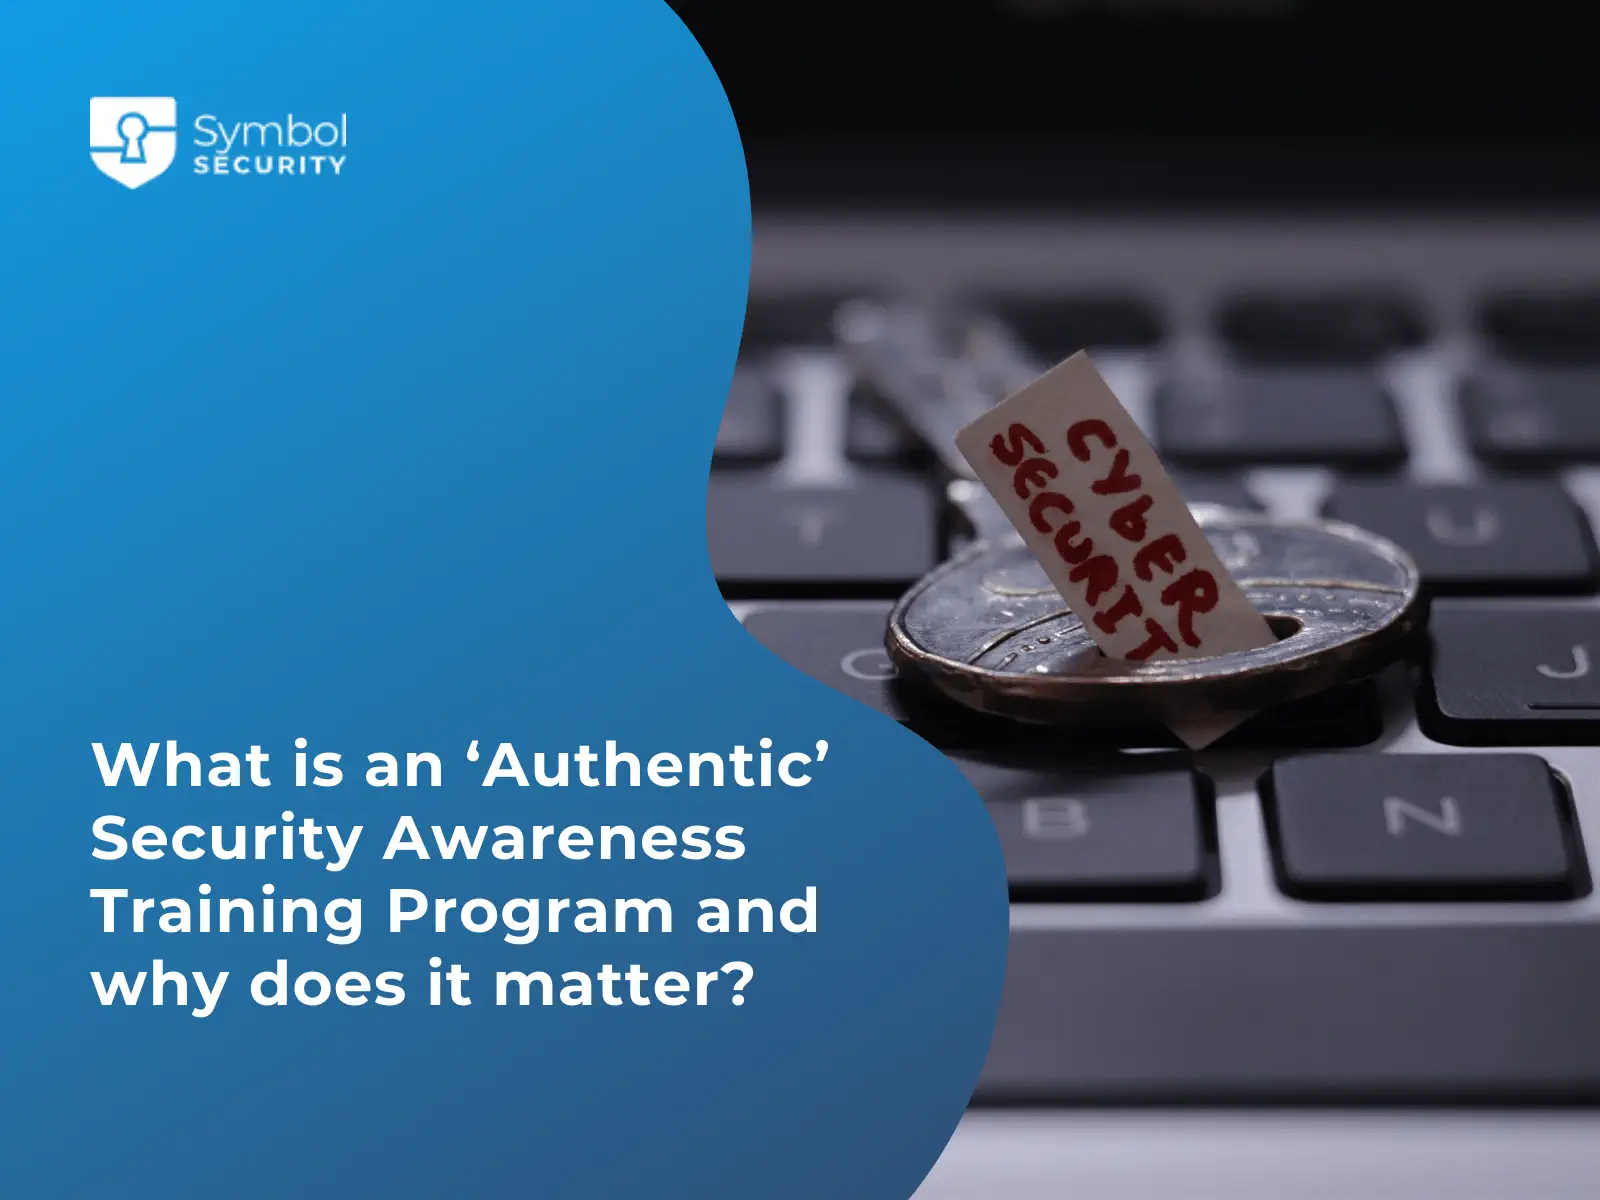 https://blog.symbolsecurity.com/hubfs/23-What-is-an-%E2%80%98Authentic-Security-Awareness-Training-Program-and-why-does-it-matter_.webp